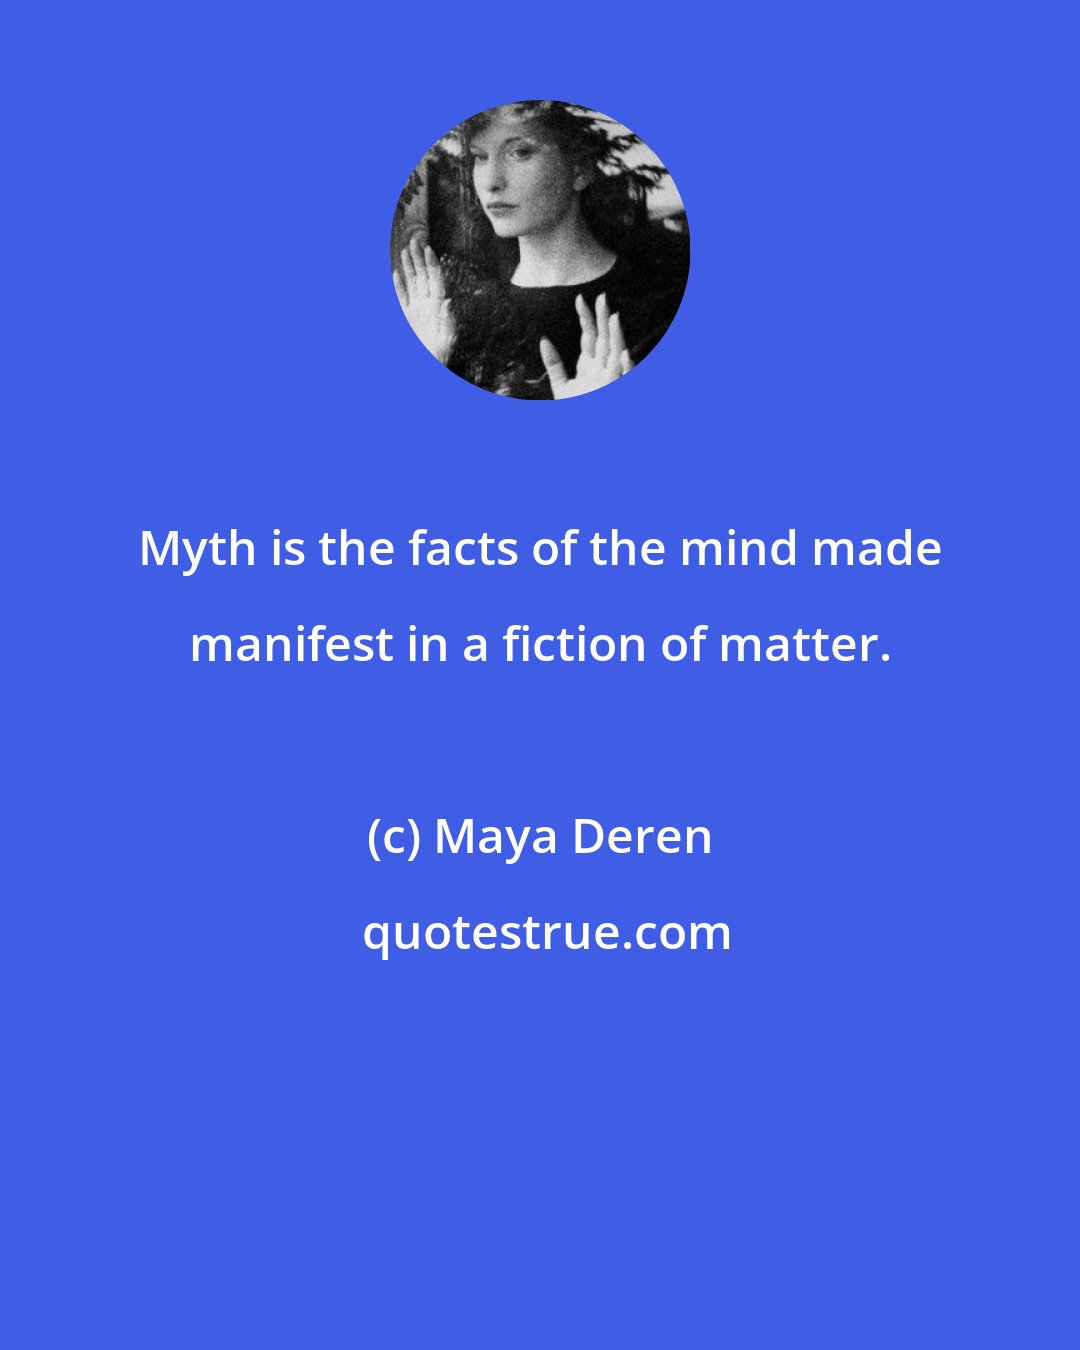 Maya Deren: Myth is the facts of the mind made manifest in a fiction of matter.